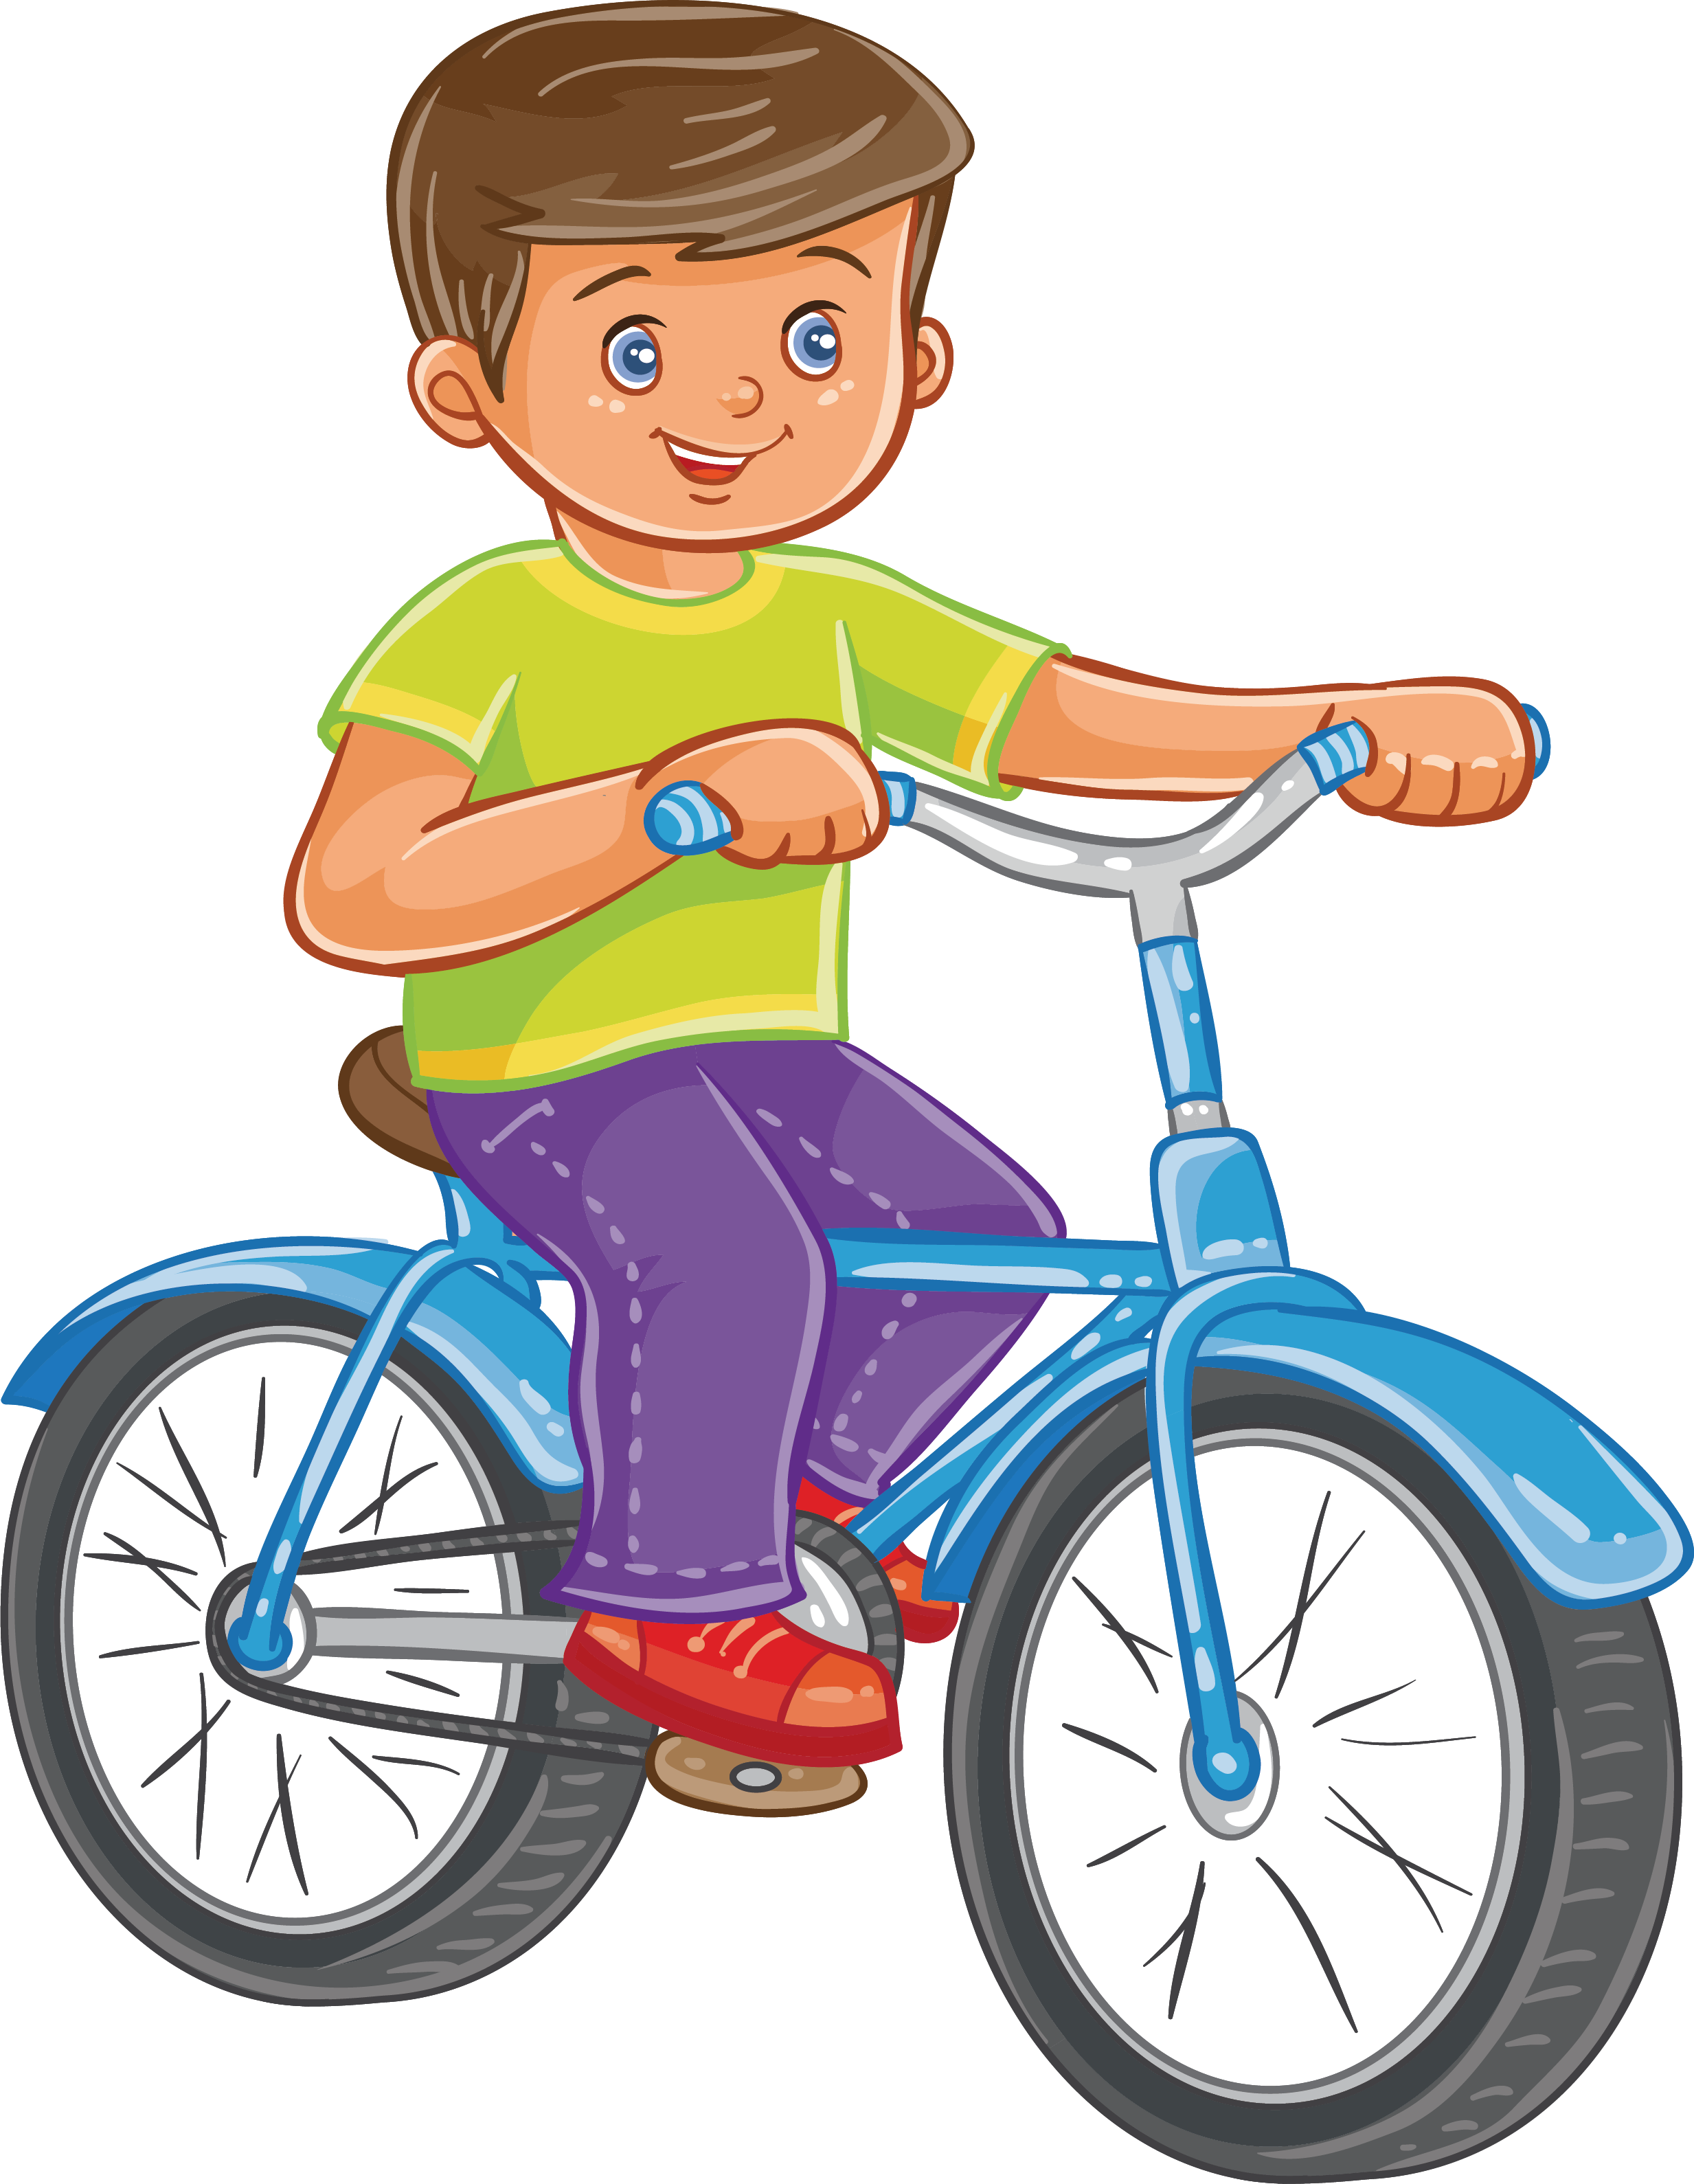 Clipart bicycle blue bike, Clipart bicycle blue bike Transparent FREE ... - Clipart Bicycle Blue Bike 2